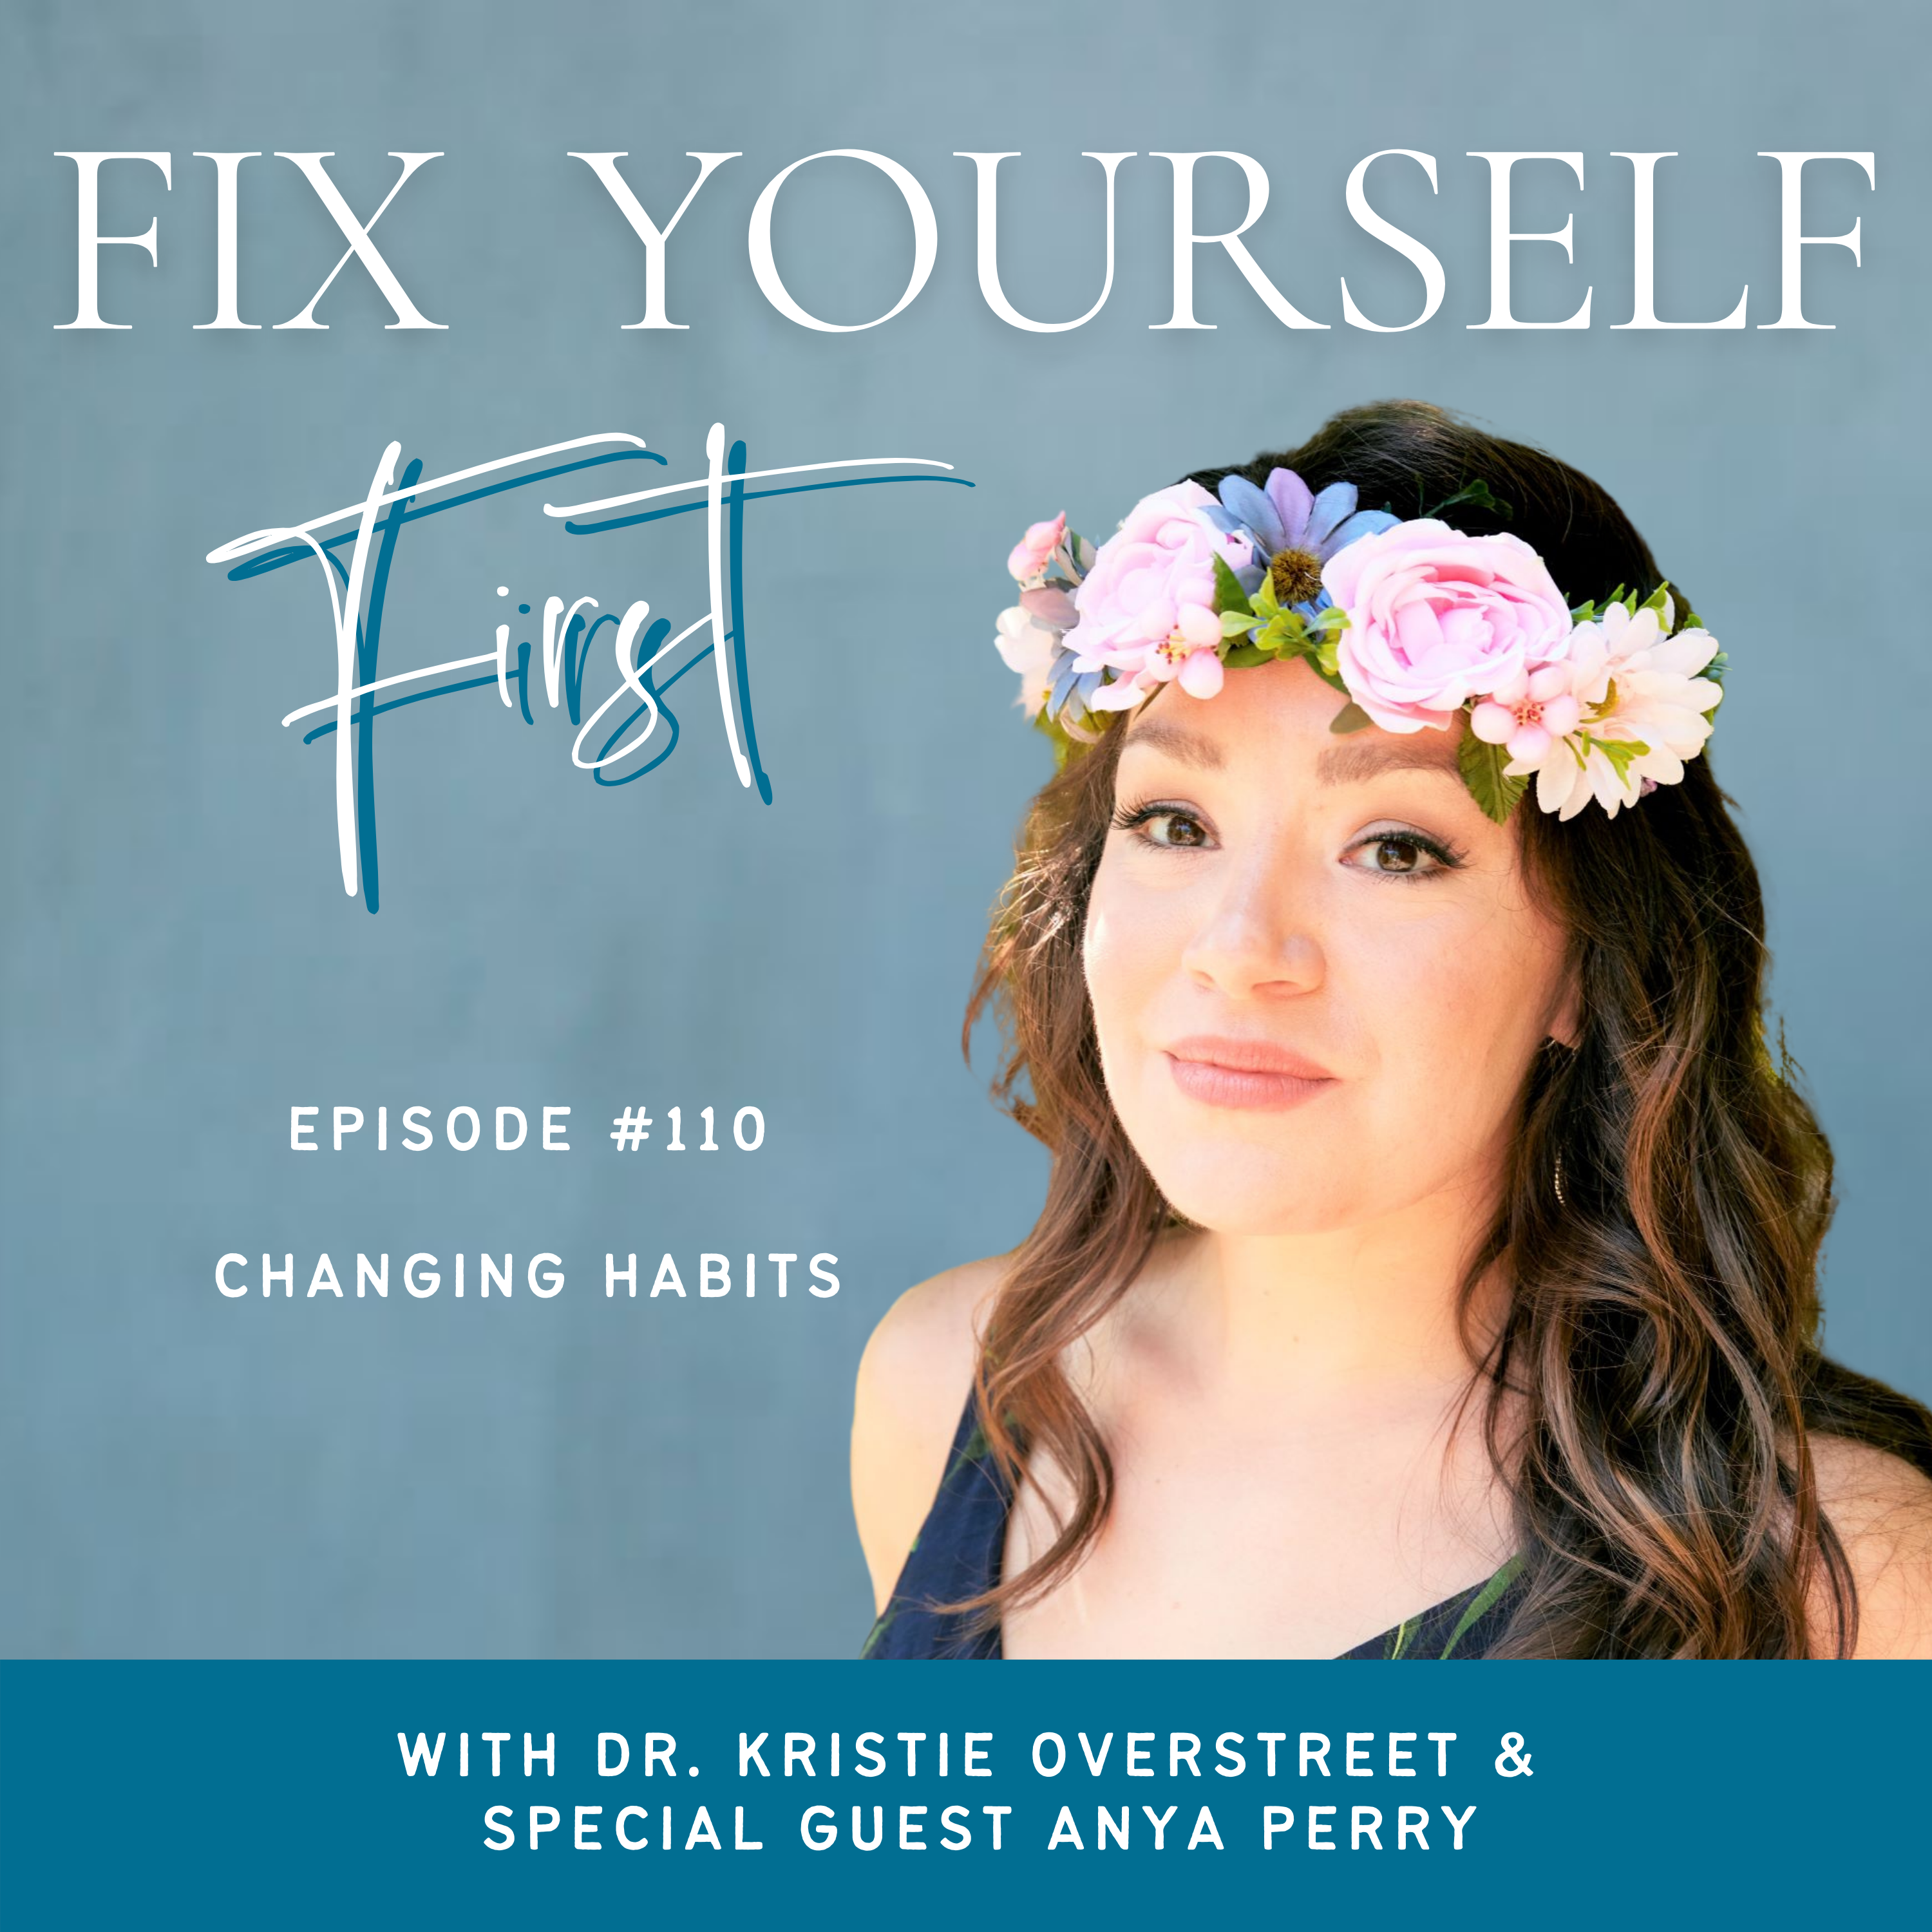 Fix Yourself First Episode 110 Changing Habits with Anya Perry